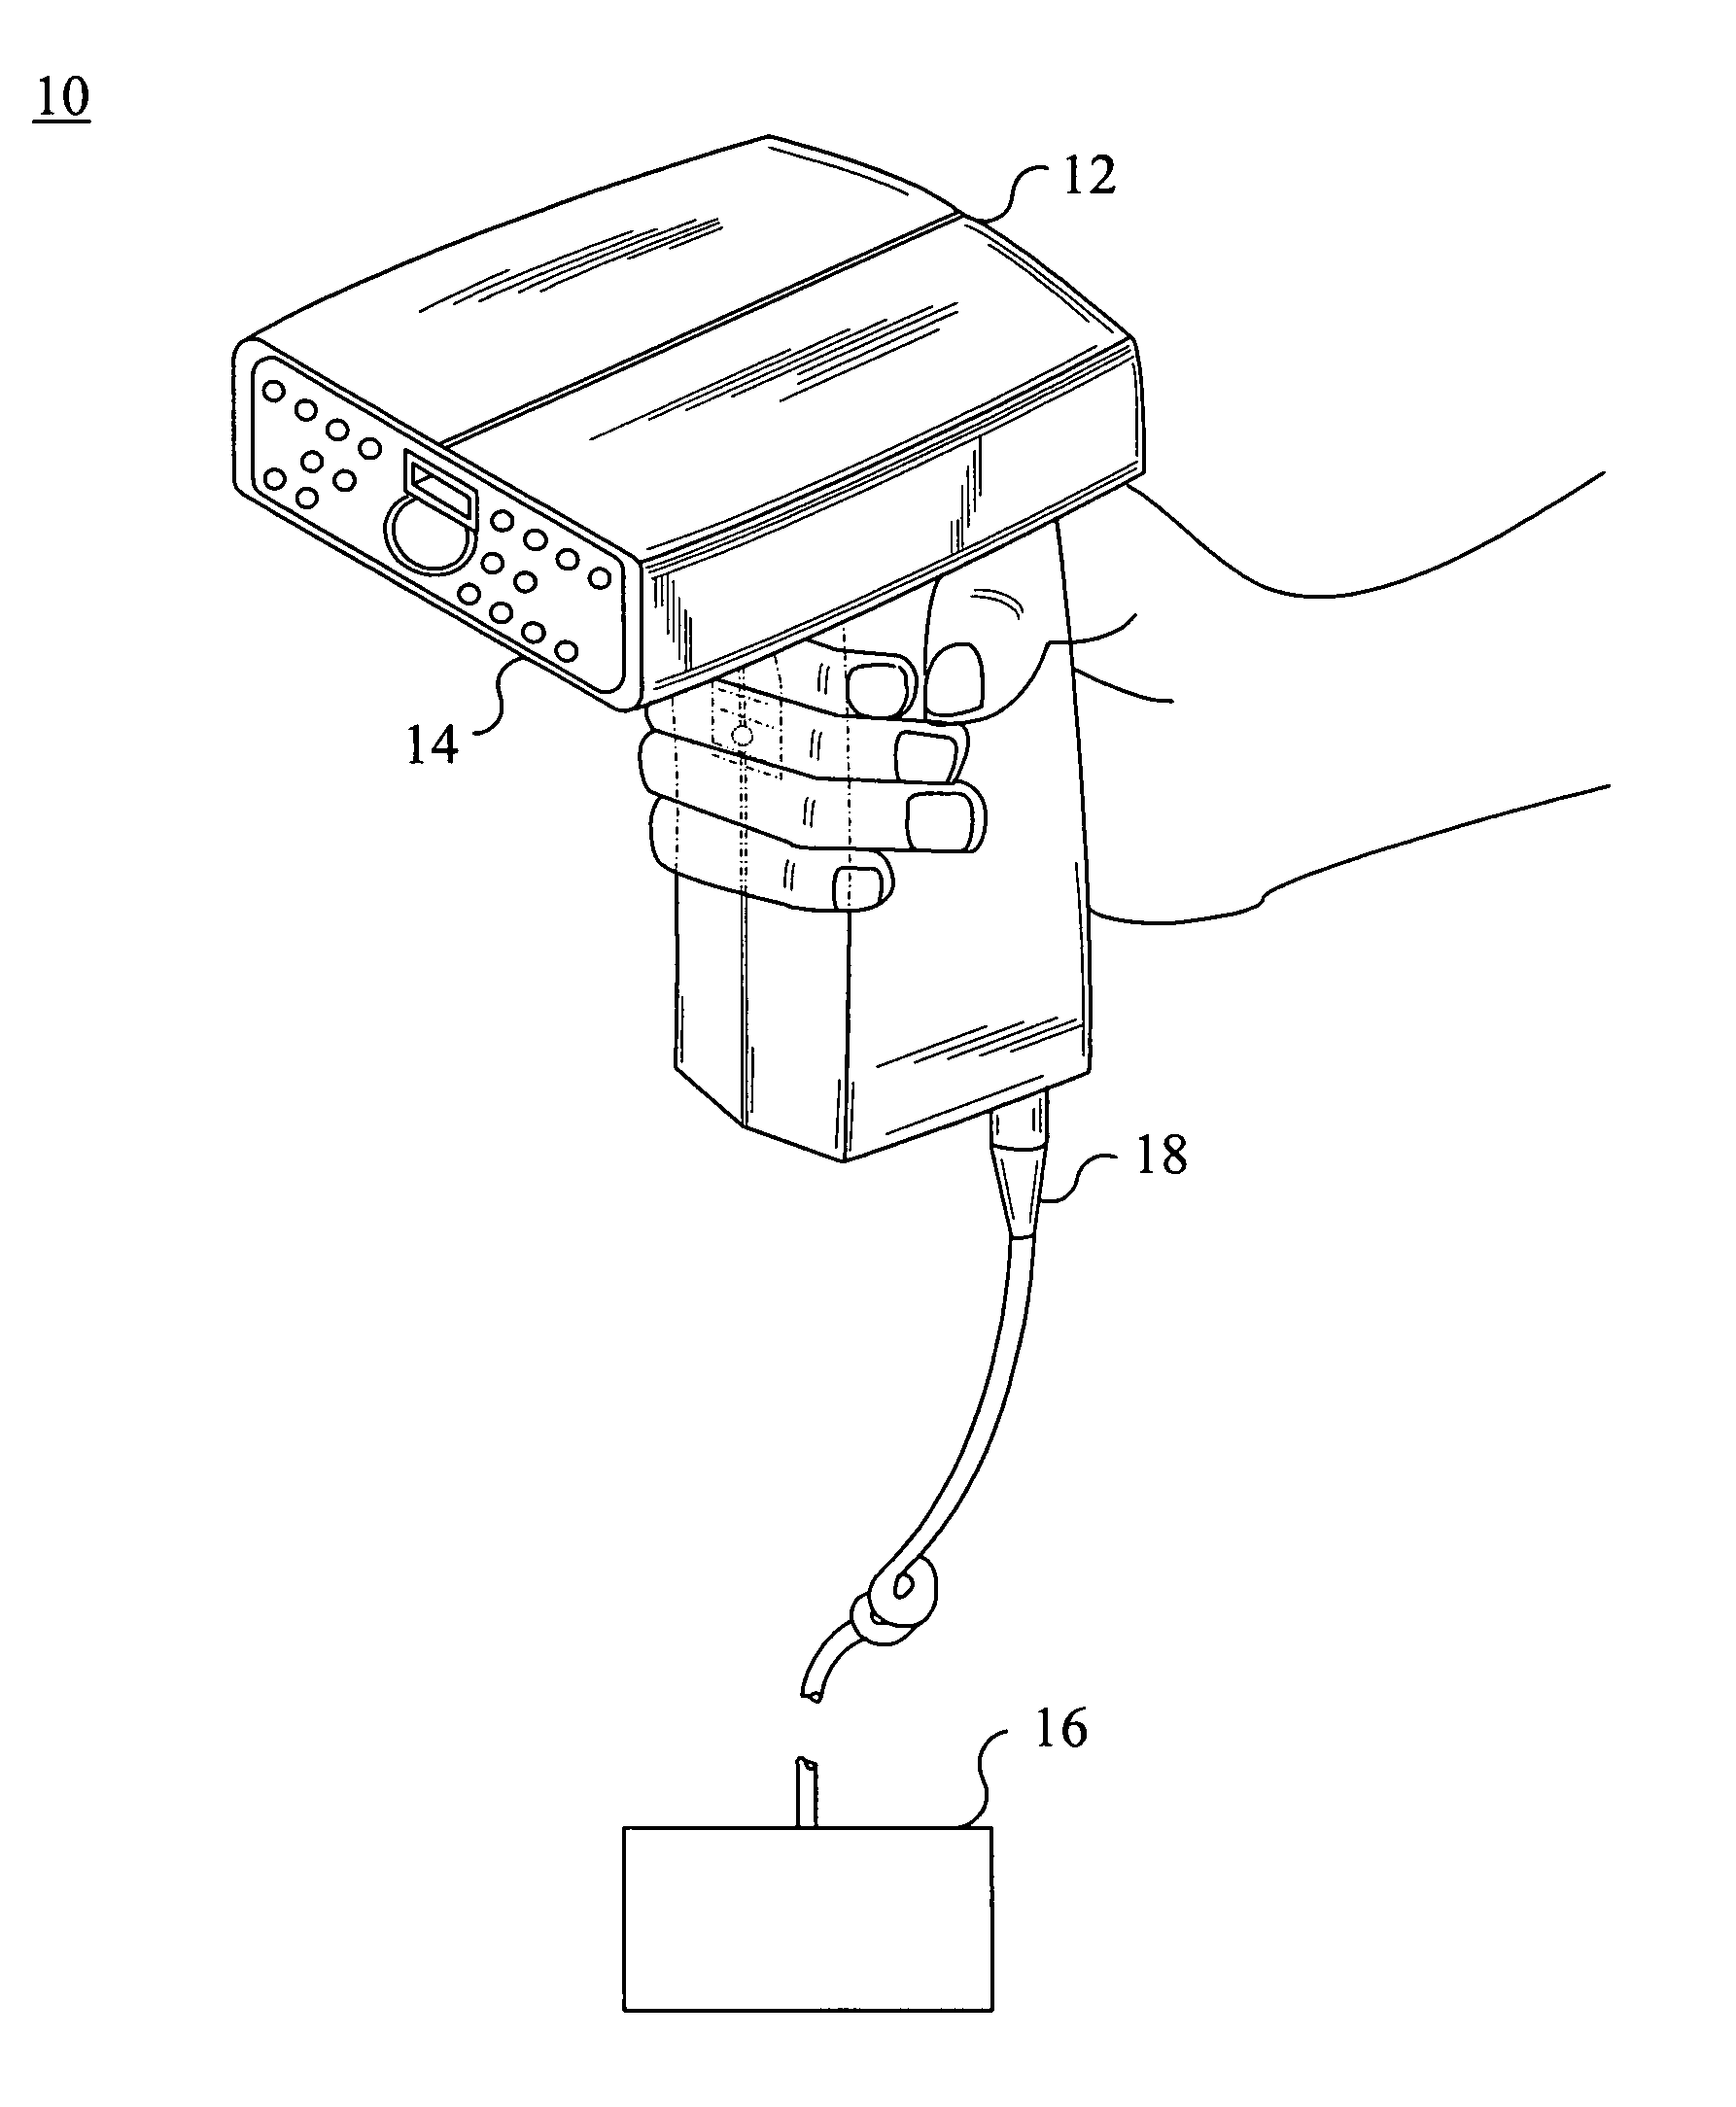 Interface for interfacing an imaging engine to an optical code reader